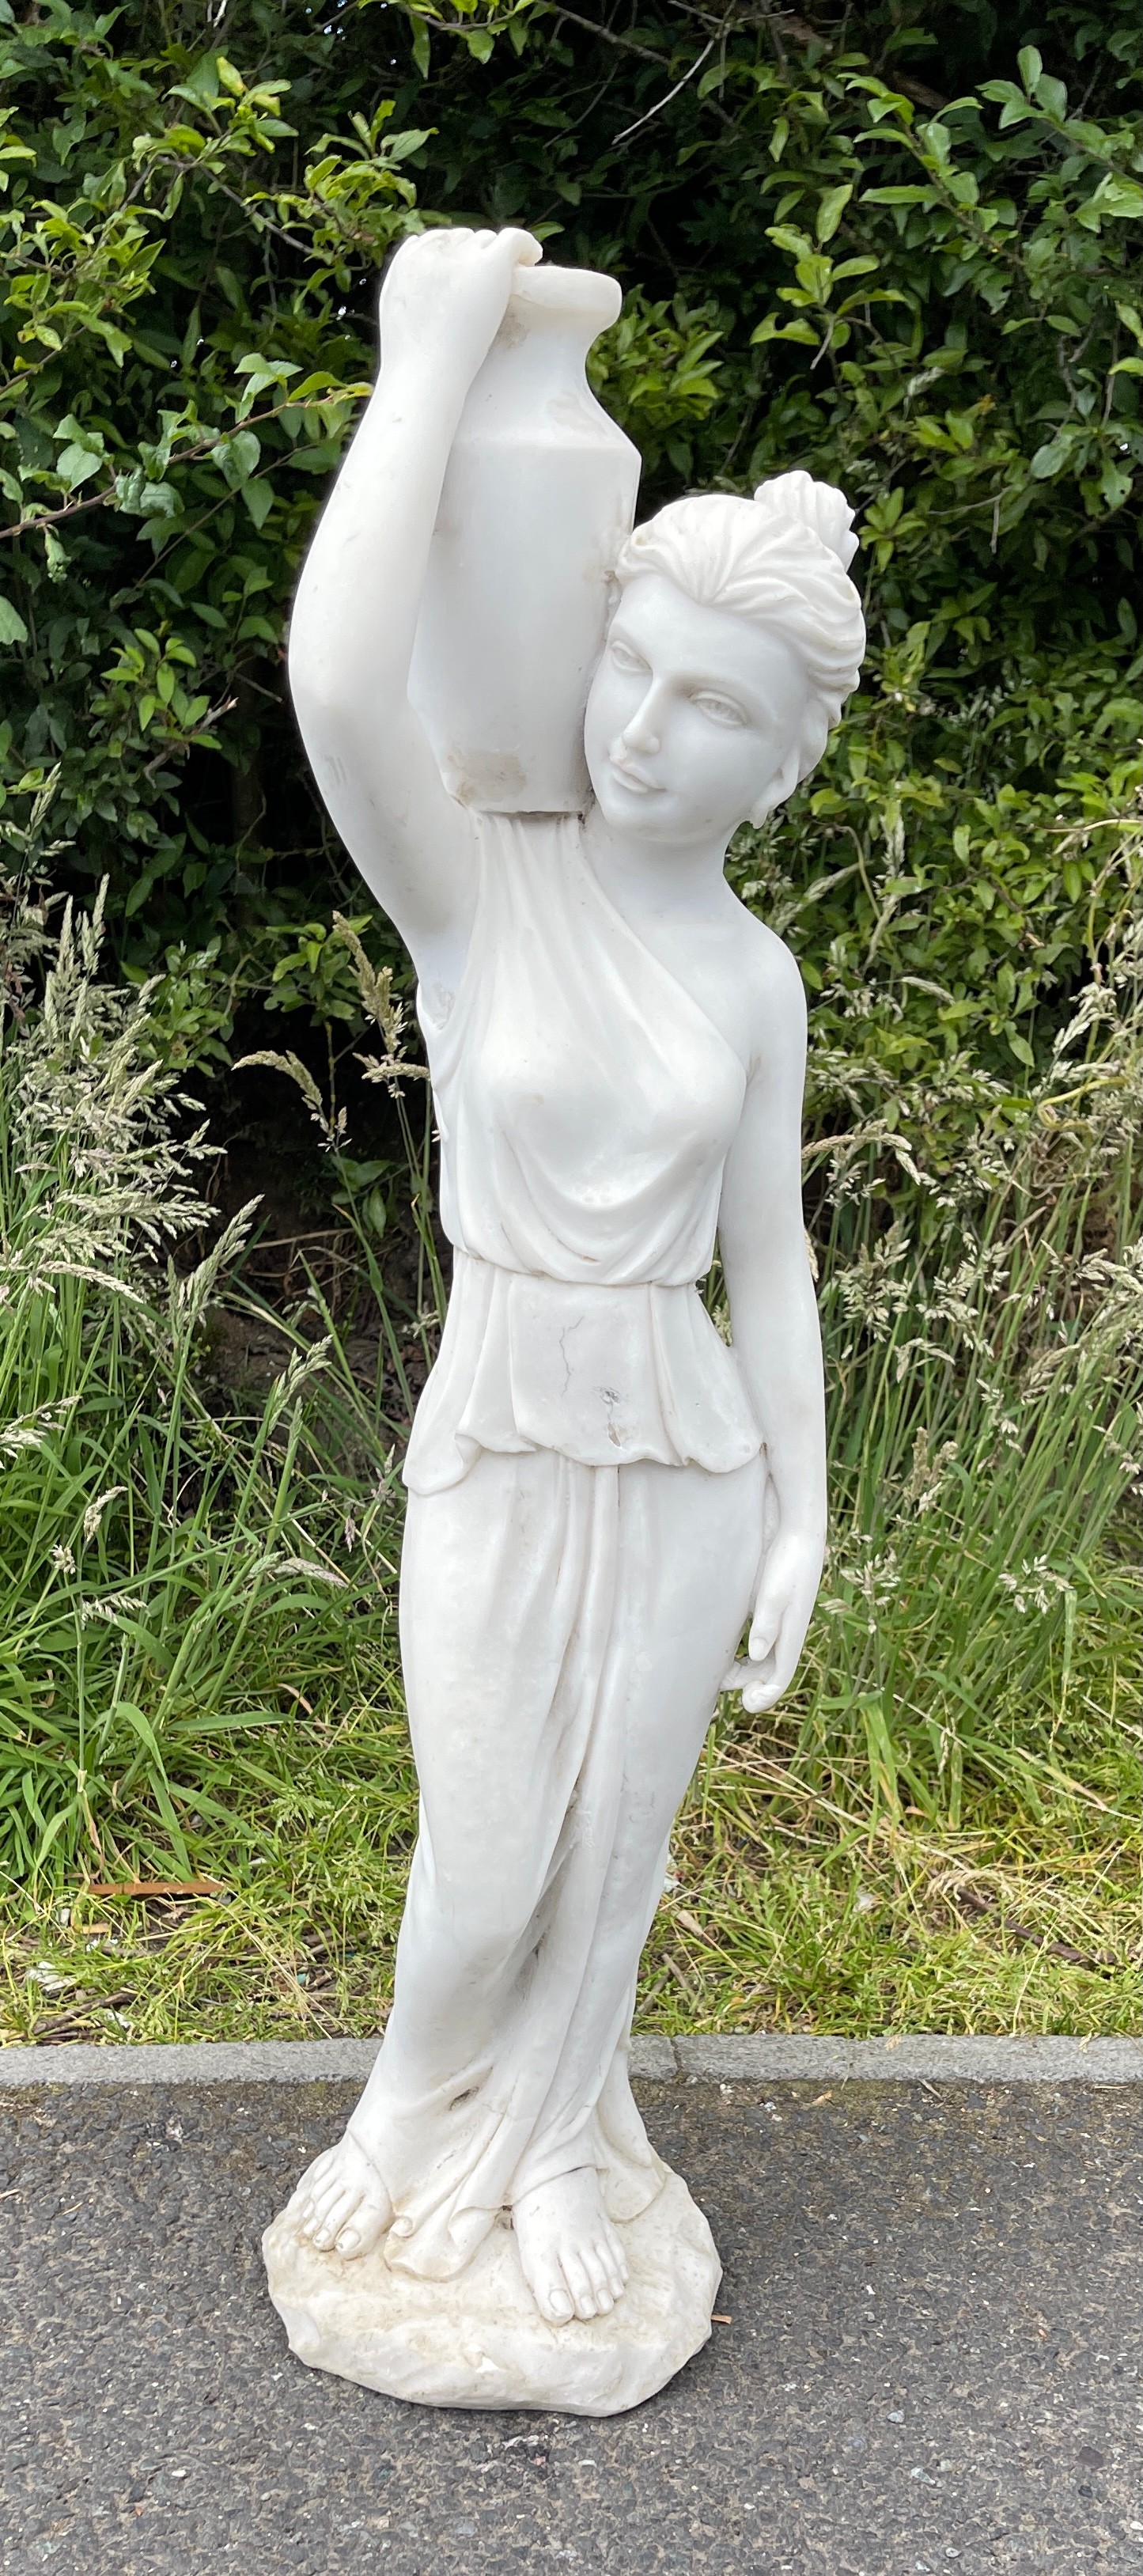 White composite lady figurine / statue, overall approximate height 31 inches